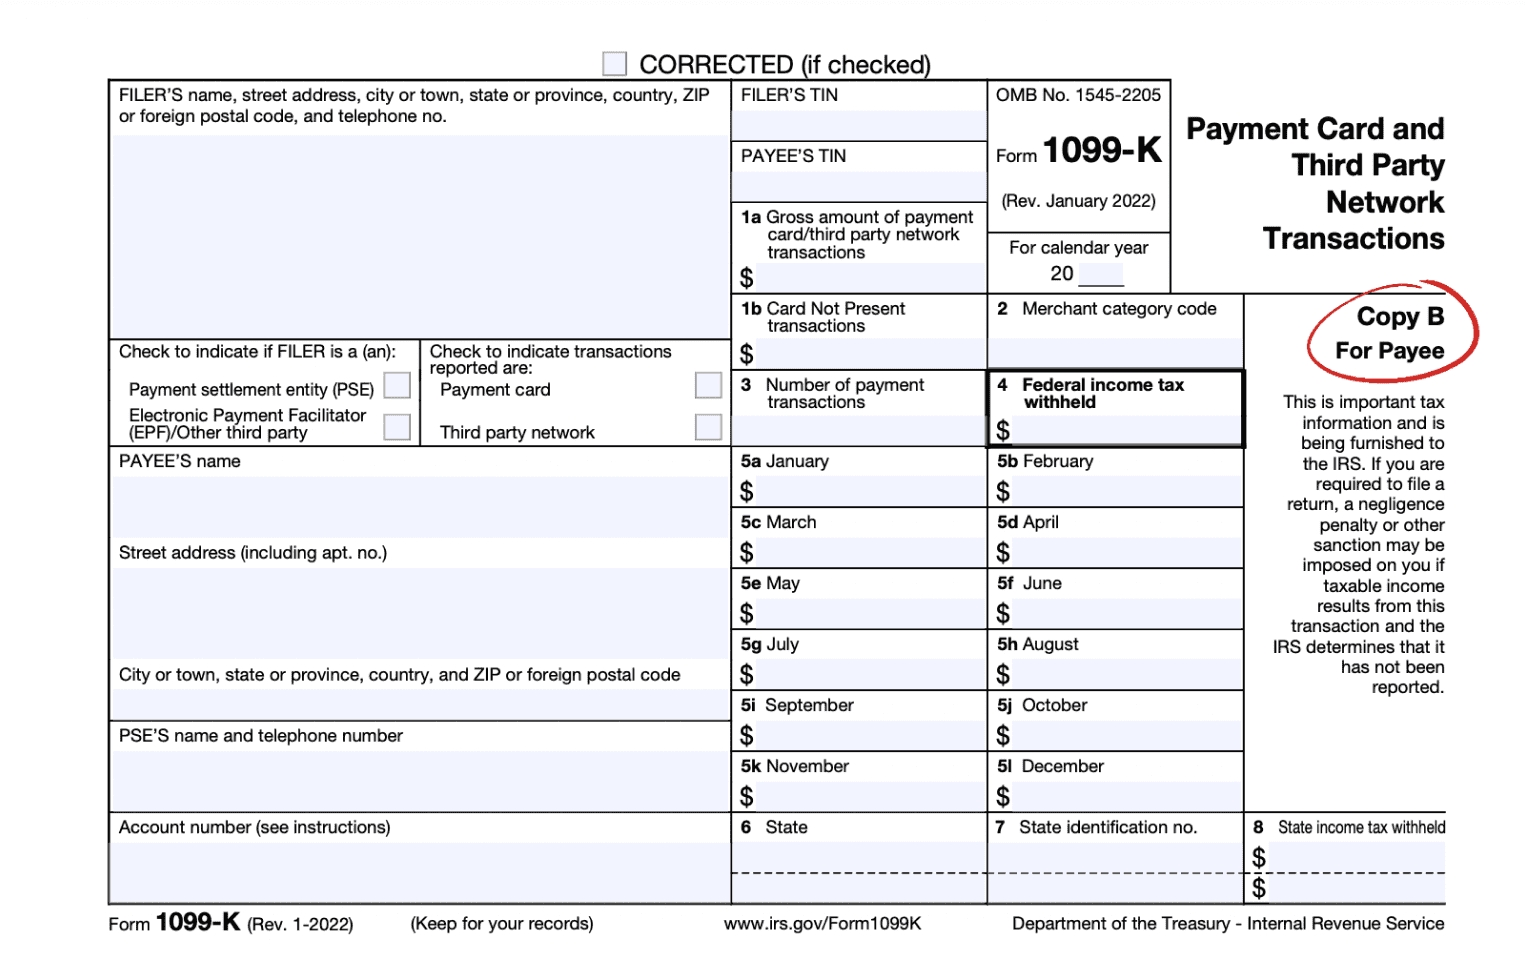 Image of Form 1099-K with fields for filer's and payee's information, payment details, and tax withholding. Relevant for self-employed, freelancers, and taxes.